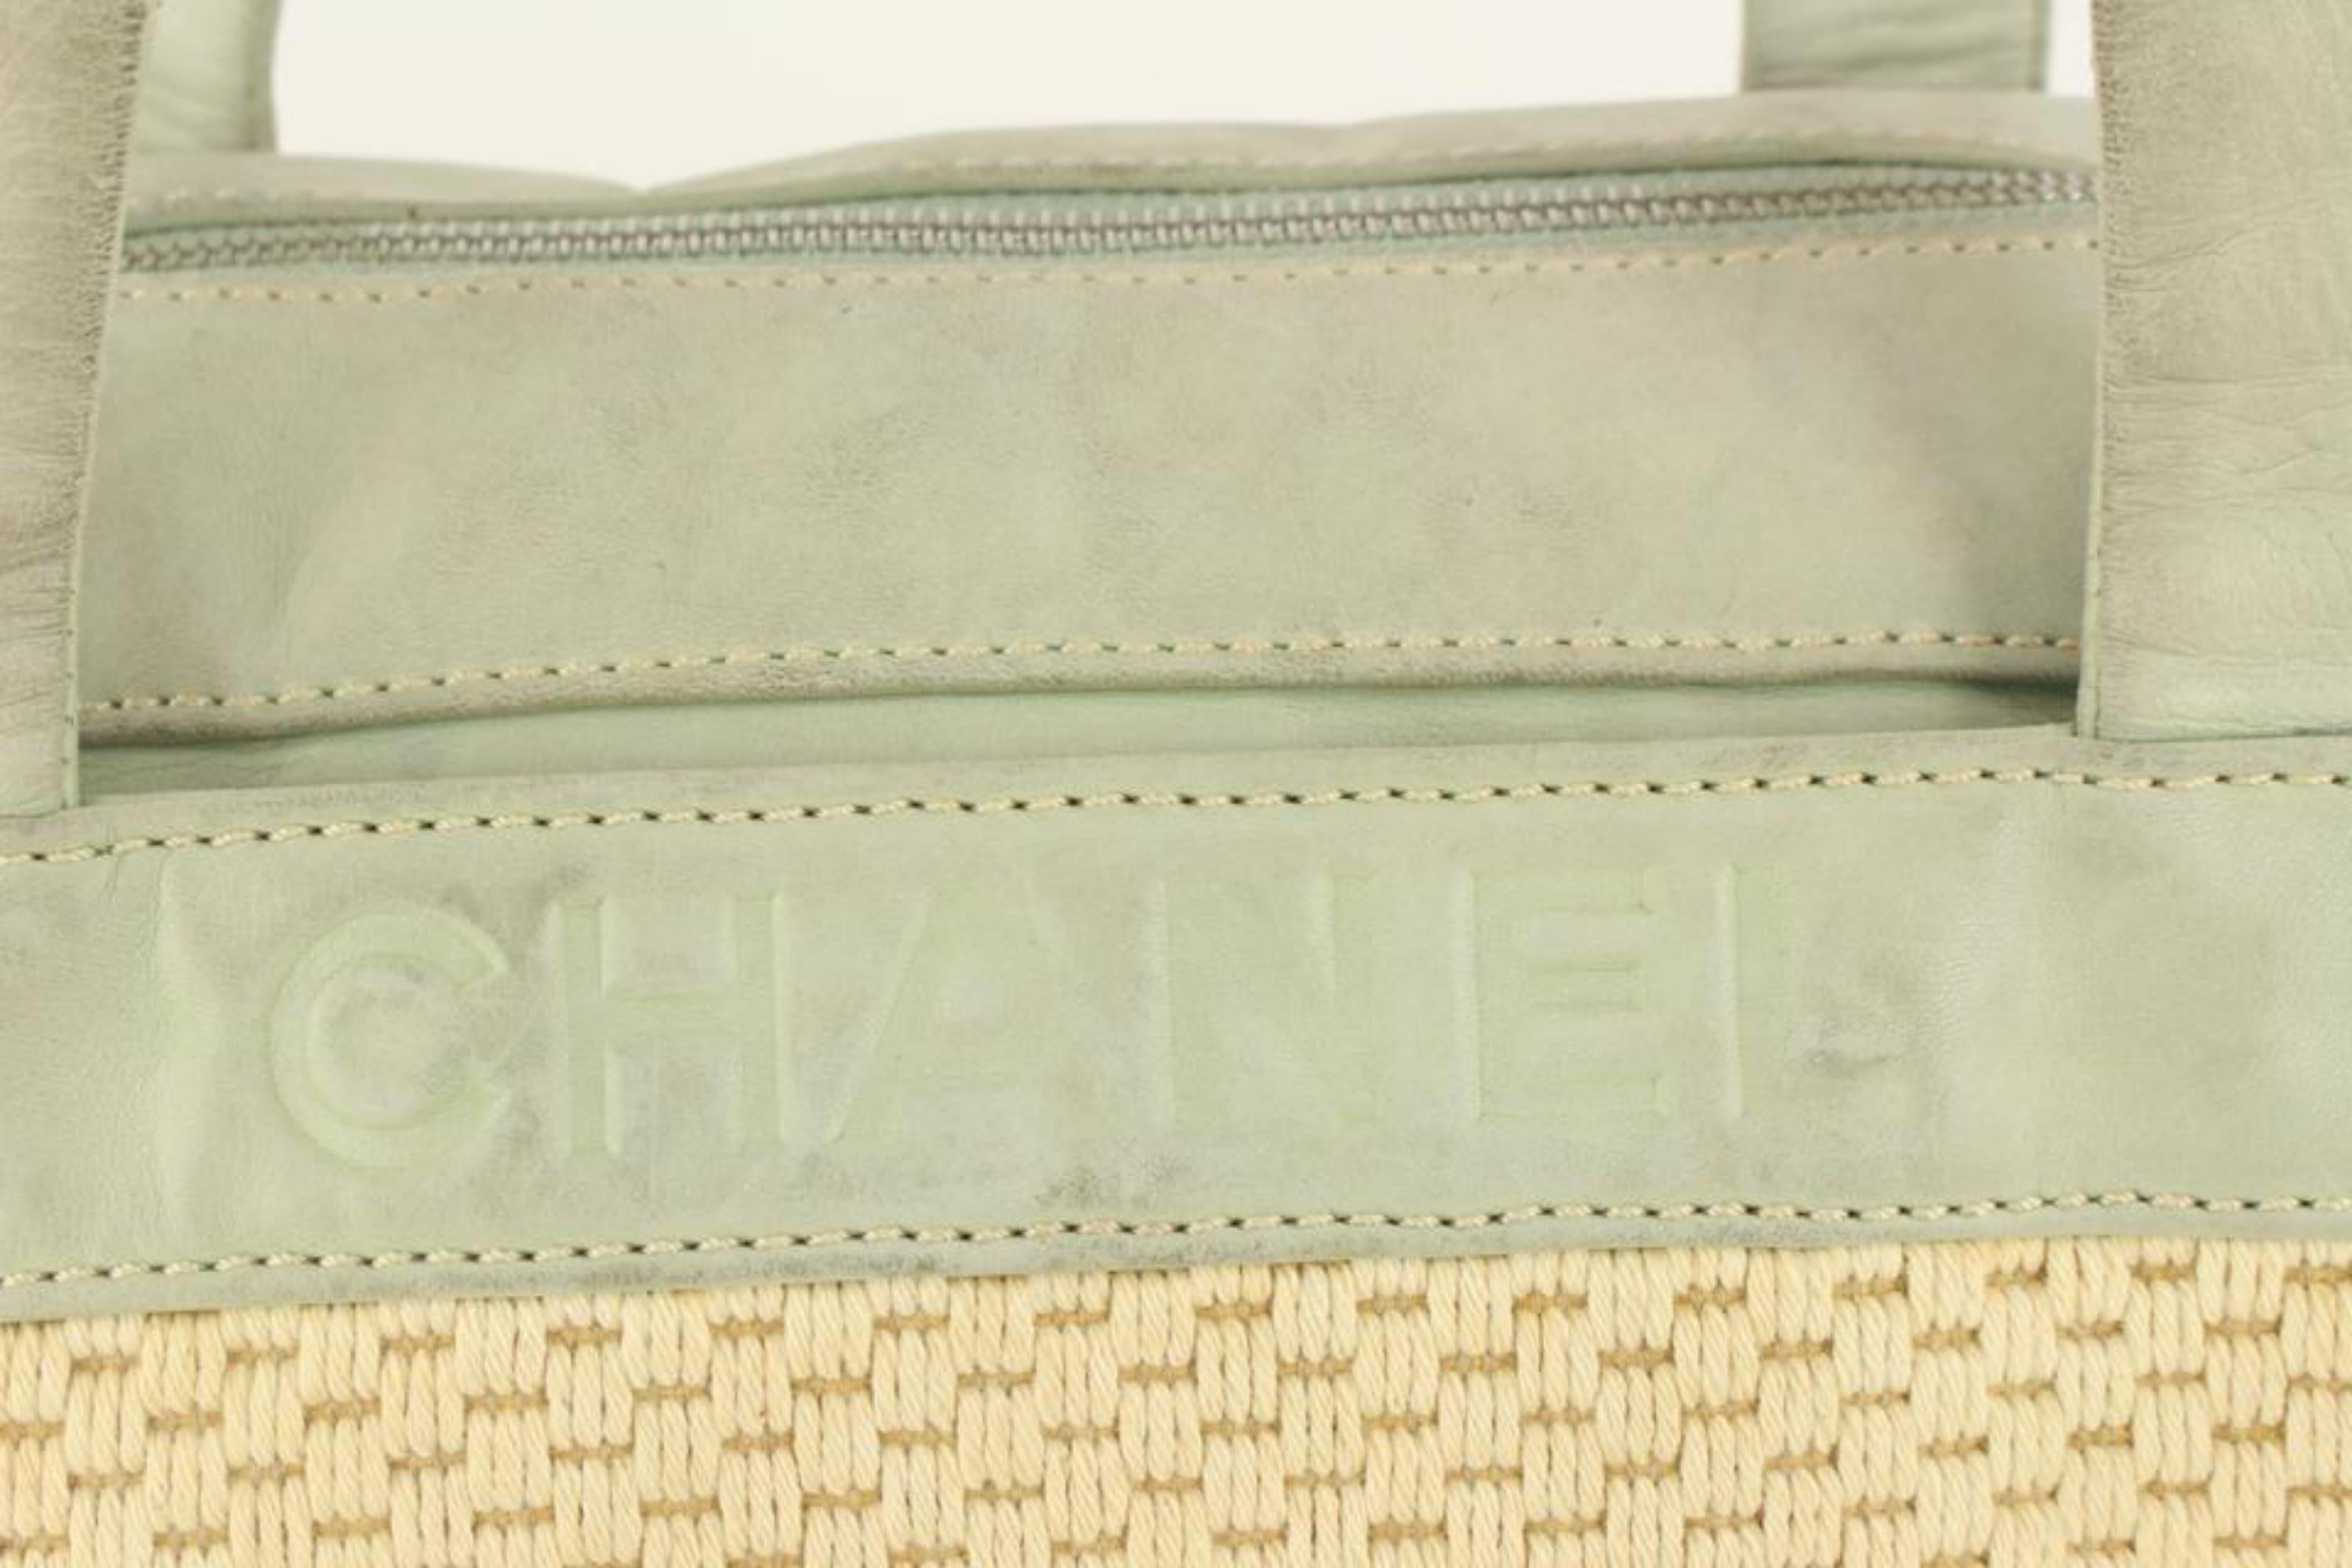 Chanel Ivory x Green Woven Fabric x Leather Boston Shoulder Bag 1115c7
Date Code/Serial Number: 9834987
Made In: Italy
Measurements: Length:  15